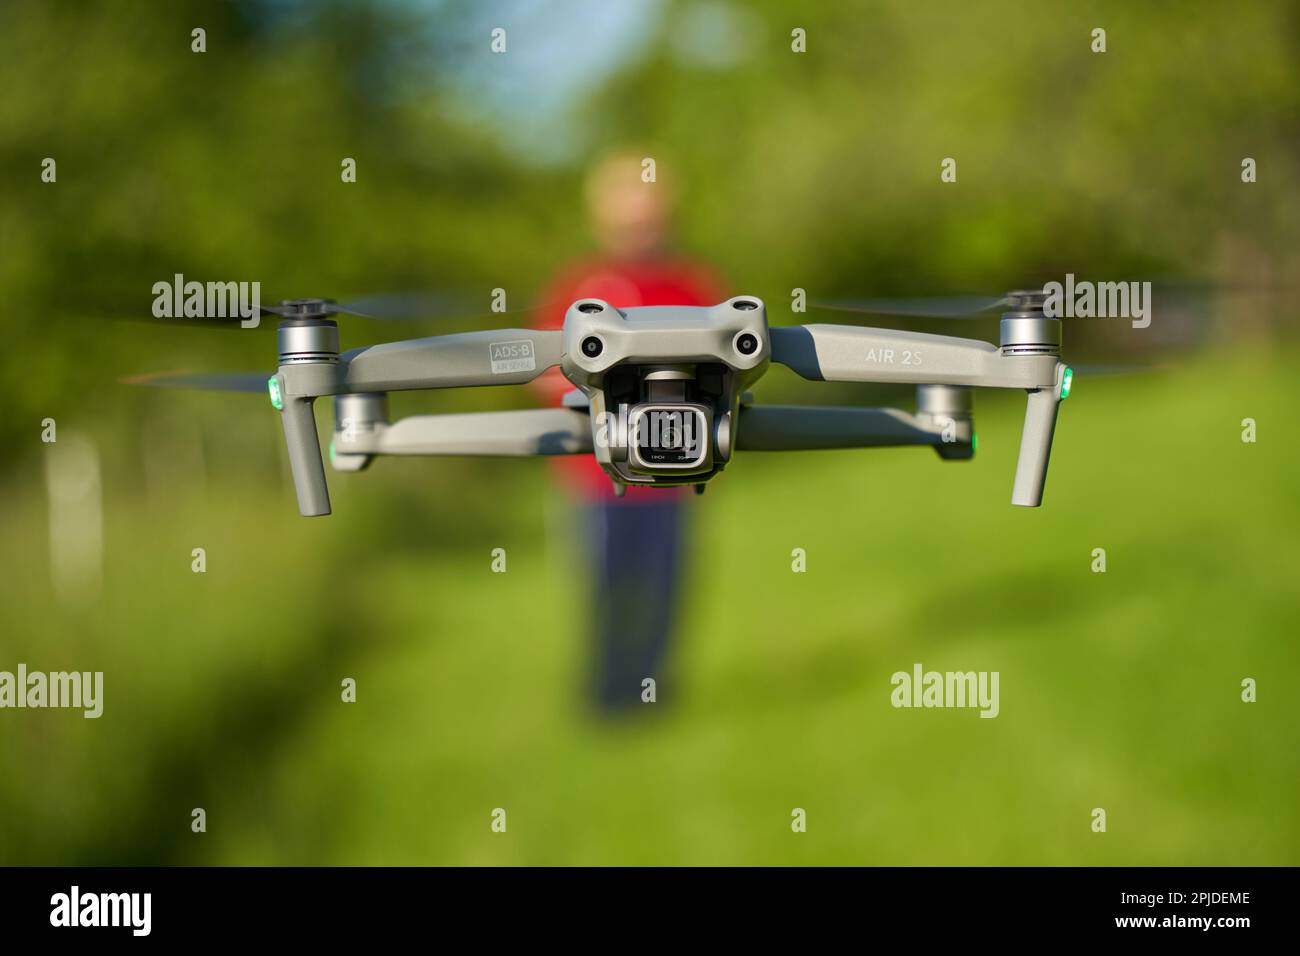 Nürtingen, Germany - May 29, 2021: Modern drone with lots of safety features and high quality camera from the manufacturer dji. The gray quadcopter ai Stock Photo